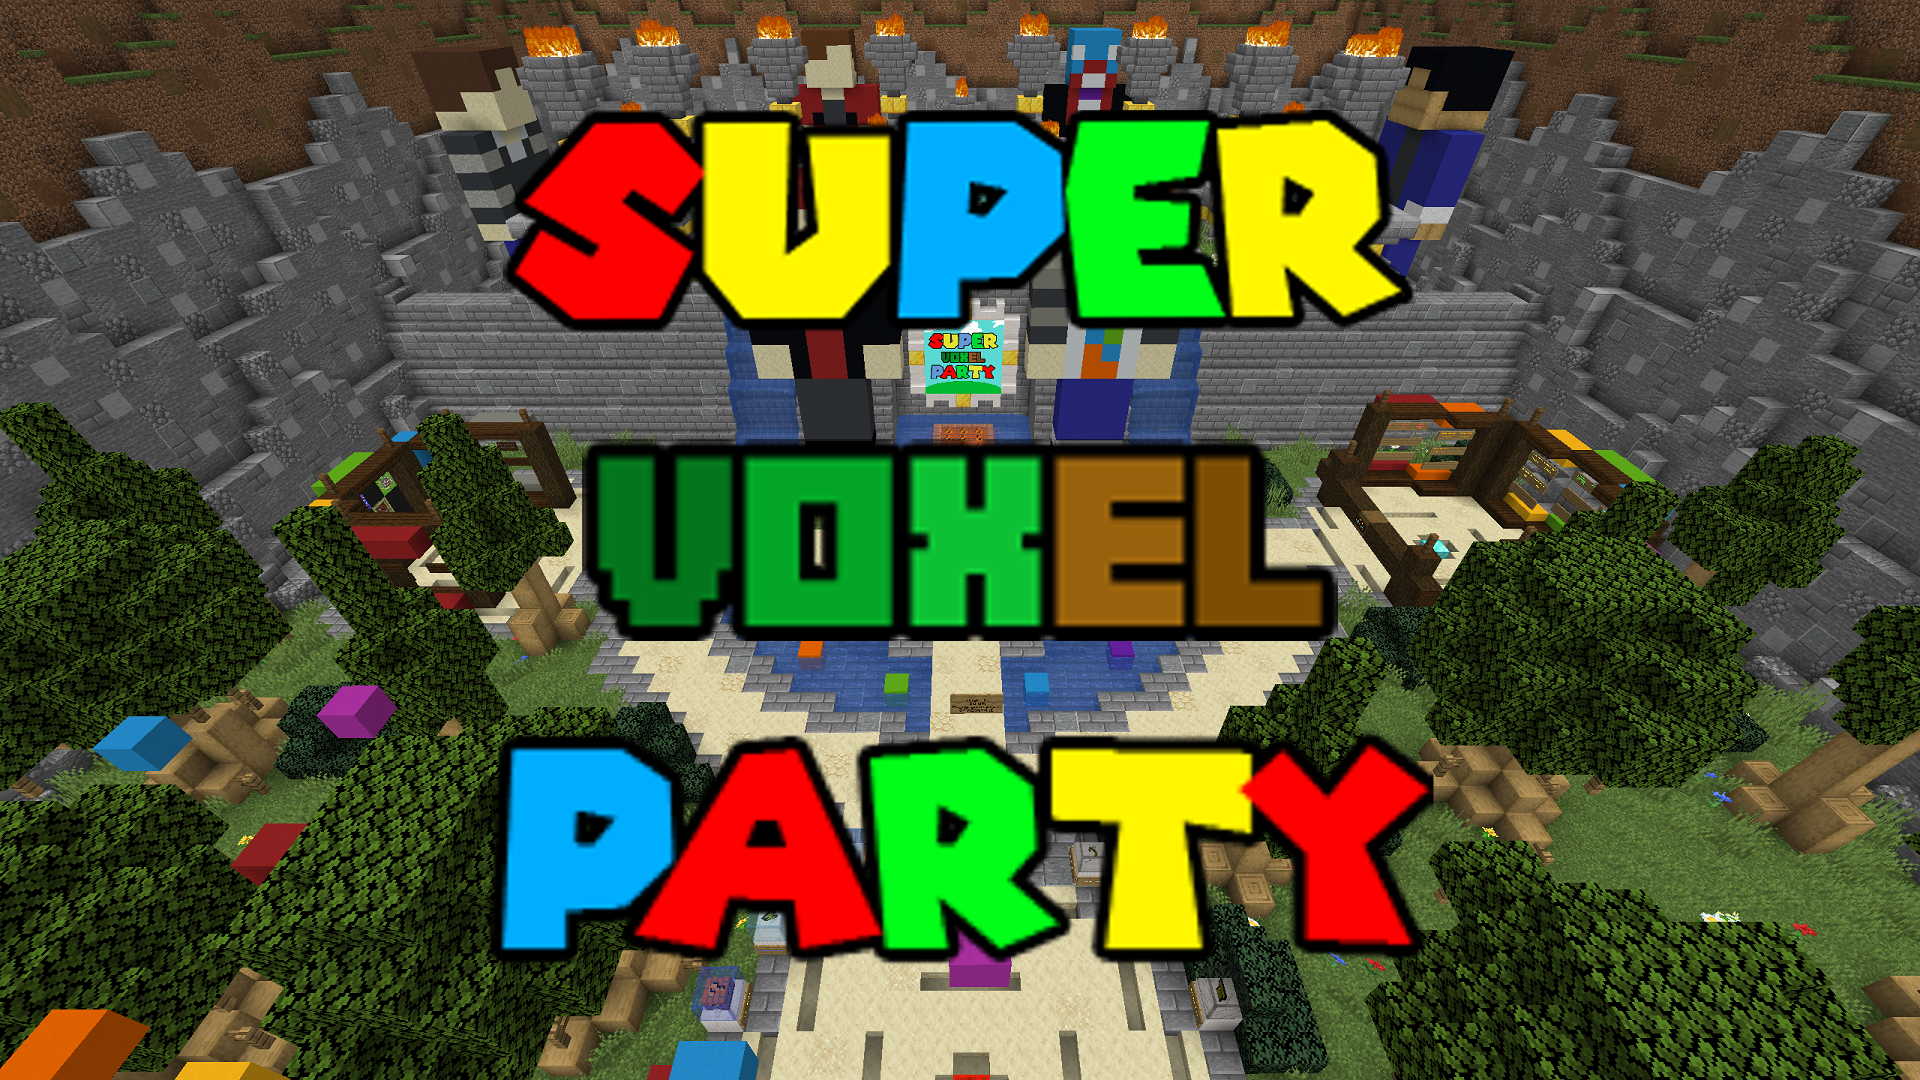 Download Super Voxel Party! for Minecraft 1.16.3